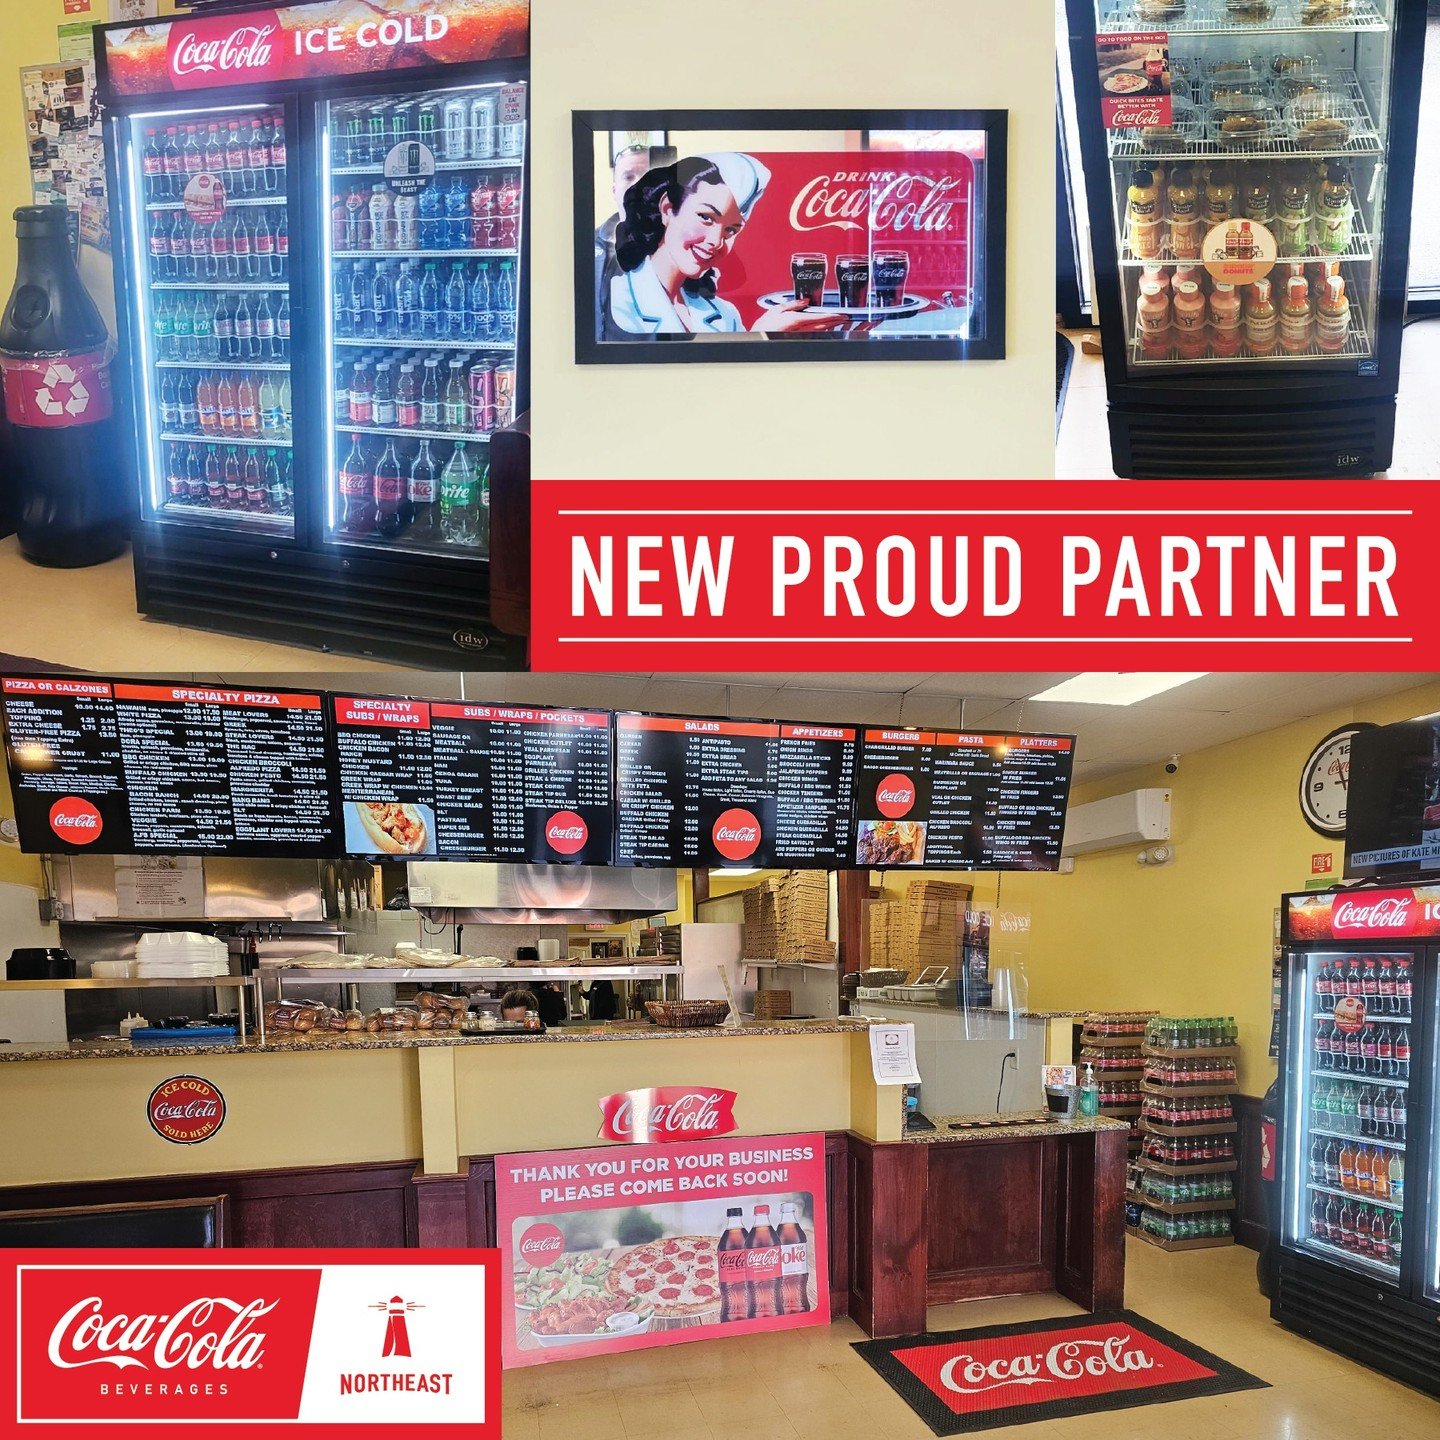 New Proud Partner!! Aj&rsquo;s Pizzaria in West Boylston, MA is now serving Coca-Cola products. Welcome to the Coke Northeast customer family!

Aj&rsquo;s Pizzaria
67 W Boylston St, West Boylston, MA
www.ajspizzeriamenu.com 

 #CokeNortheast #NewProu